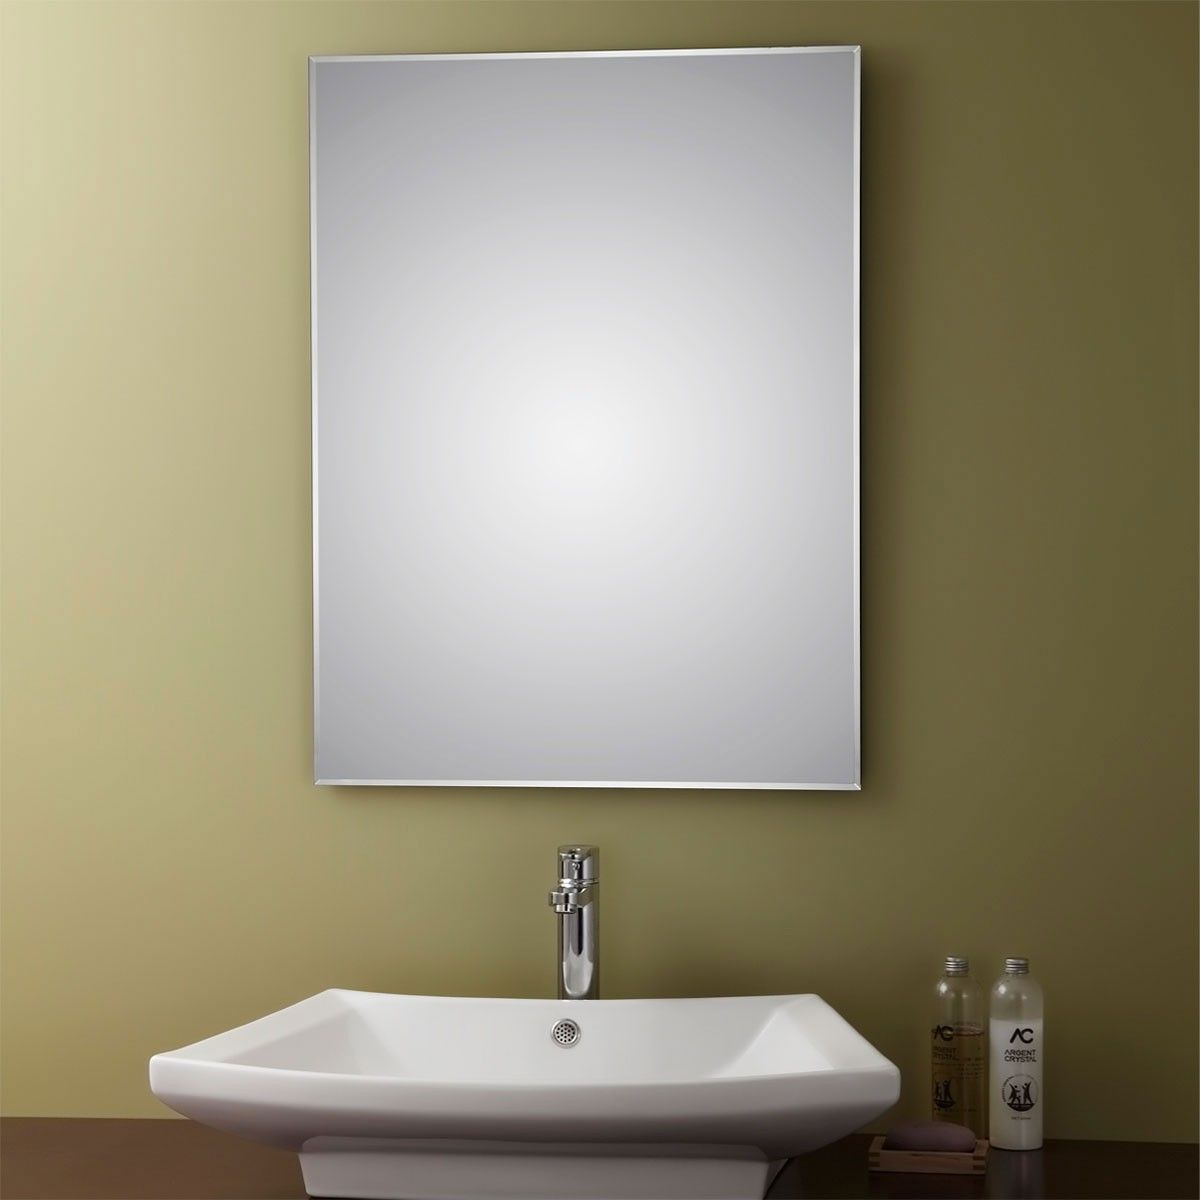 Unframed Bathroom Silvered Mirror - Reversible and Beveled Edge/24 Inch x 32 Inch (YJ-30008H)